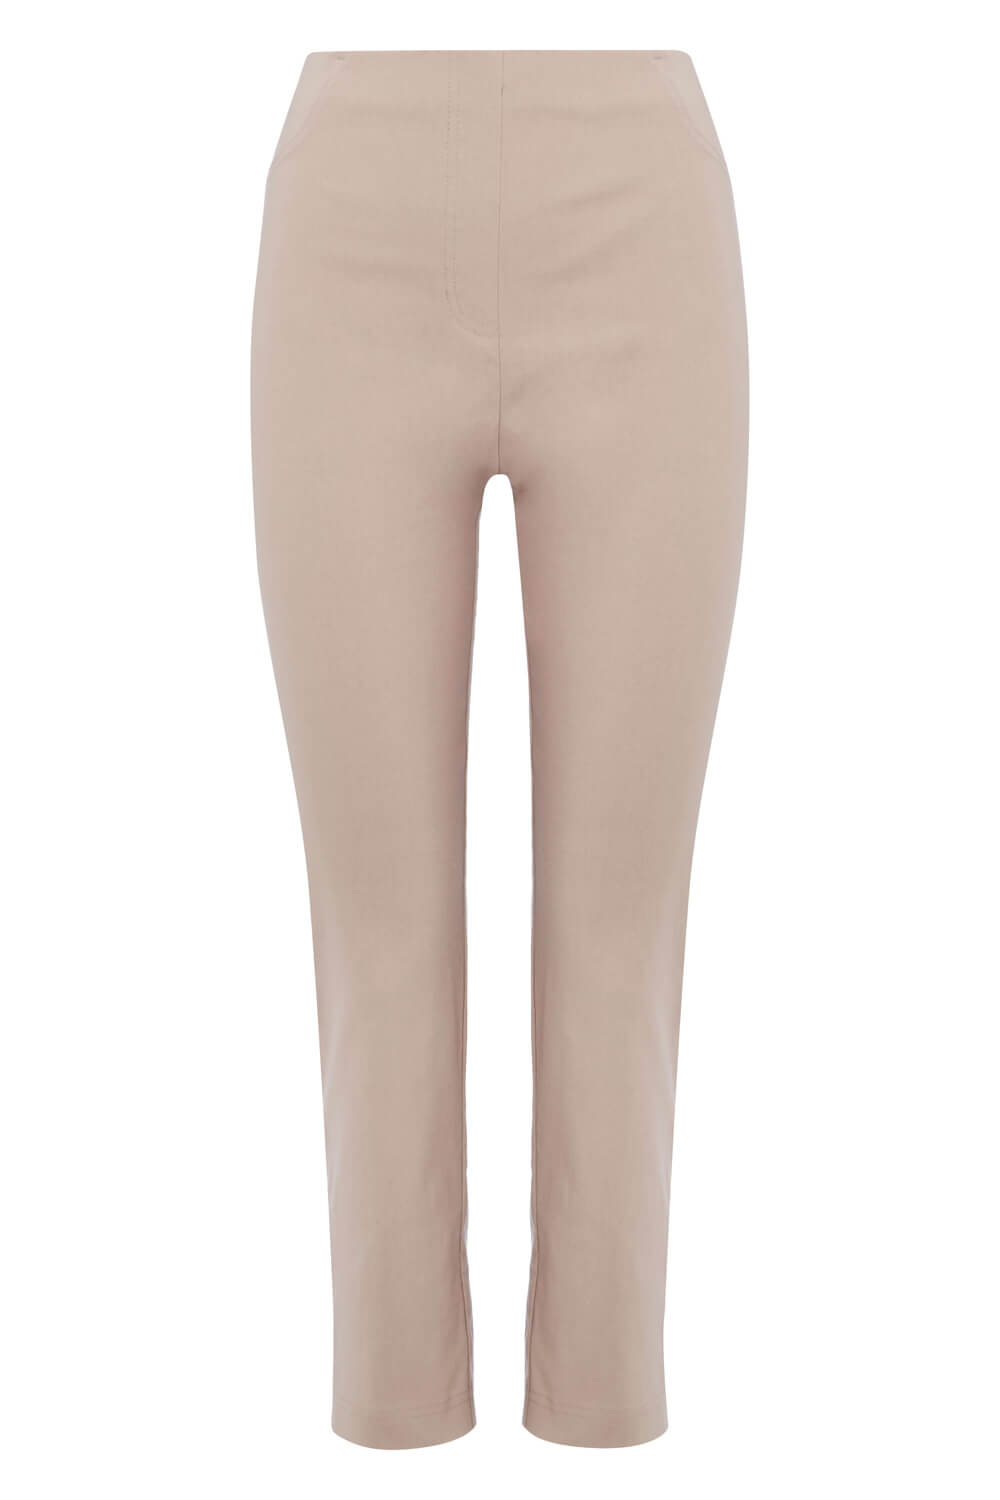 Taupe 3/4 Length Stretch Trouser, Image 4 of 4